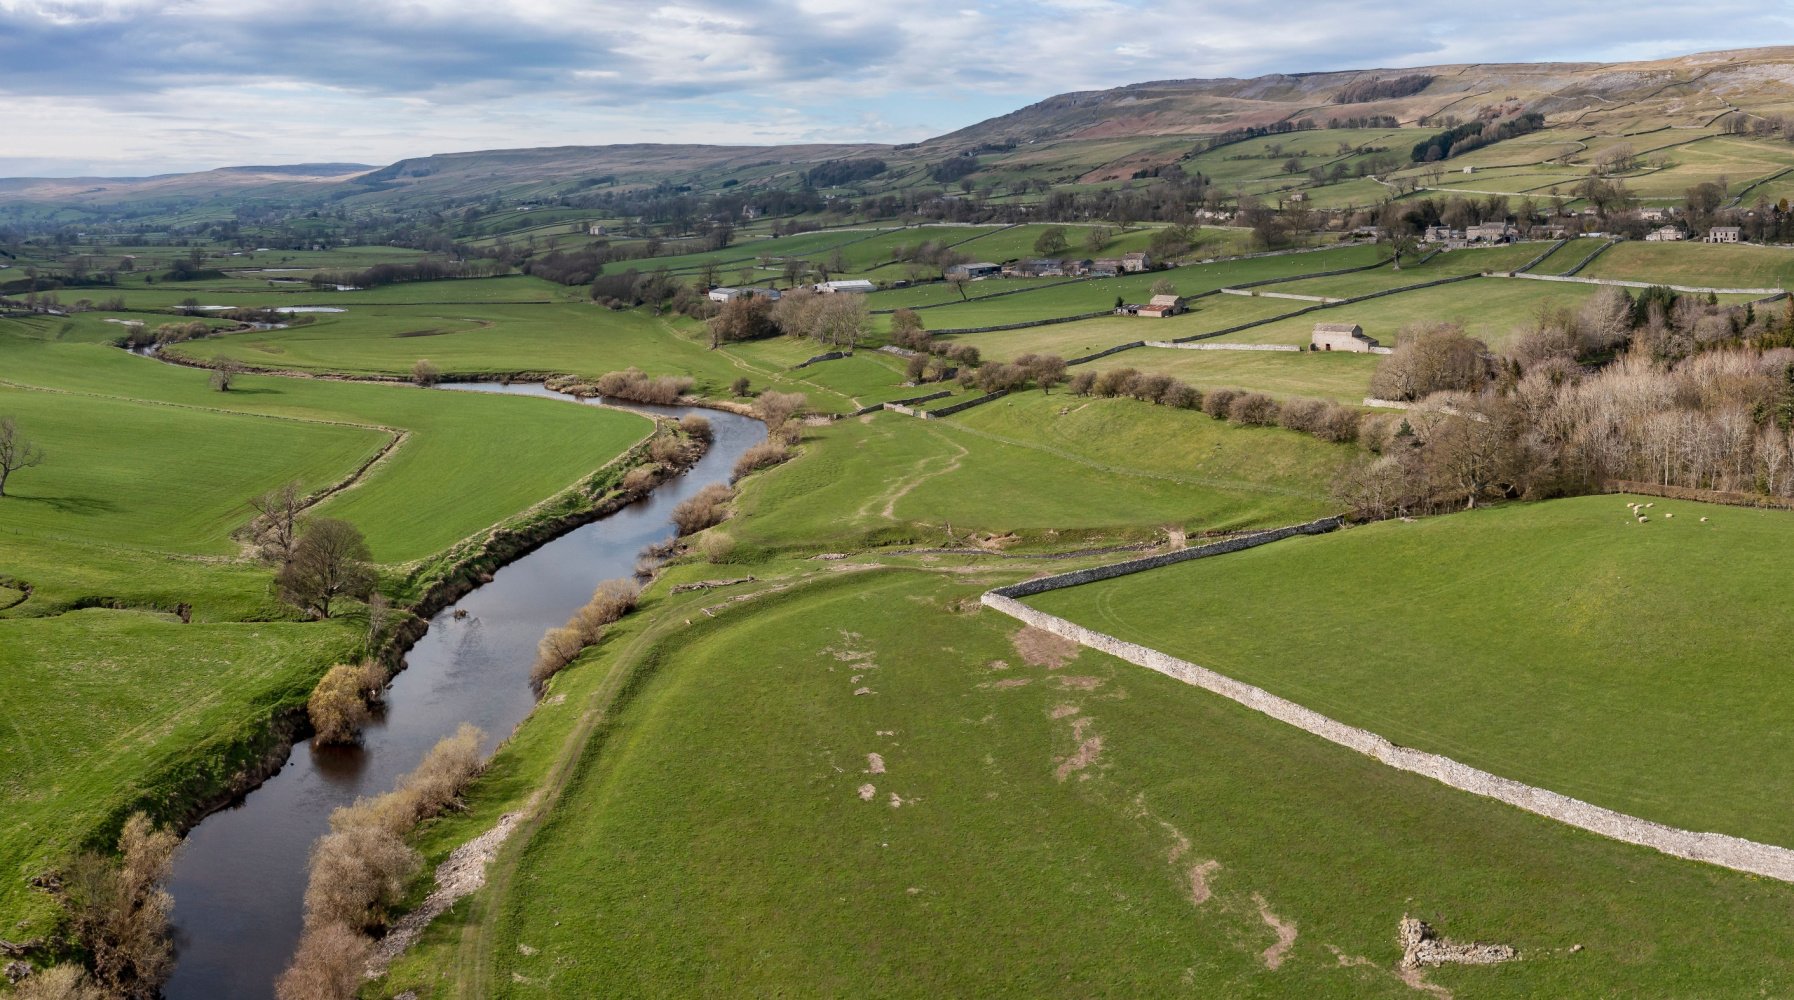 Image name wensleydale river ure near thornton rust north yorkshire aerial view dale the 8 image from the post Worton, North Yorkshire in Yorkshire.com.